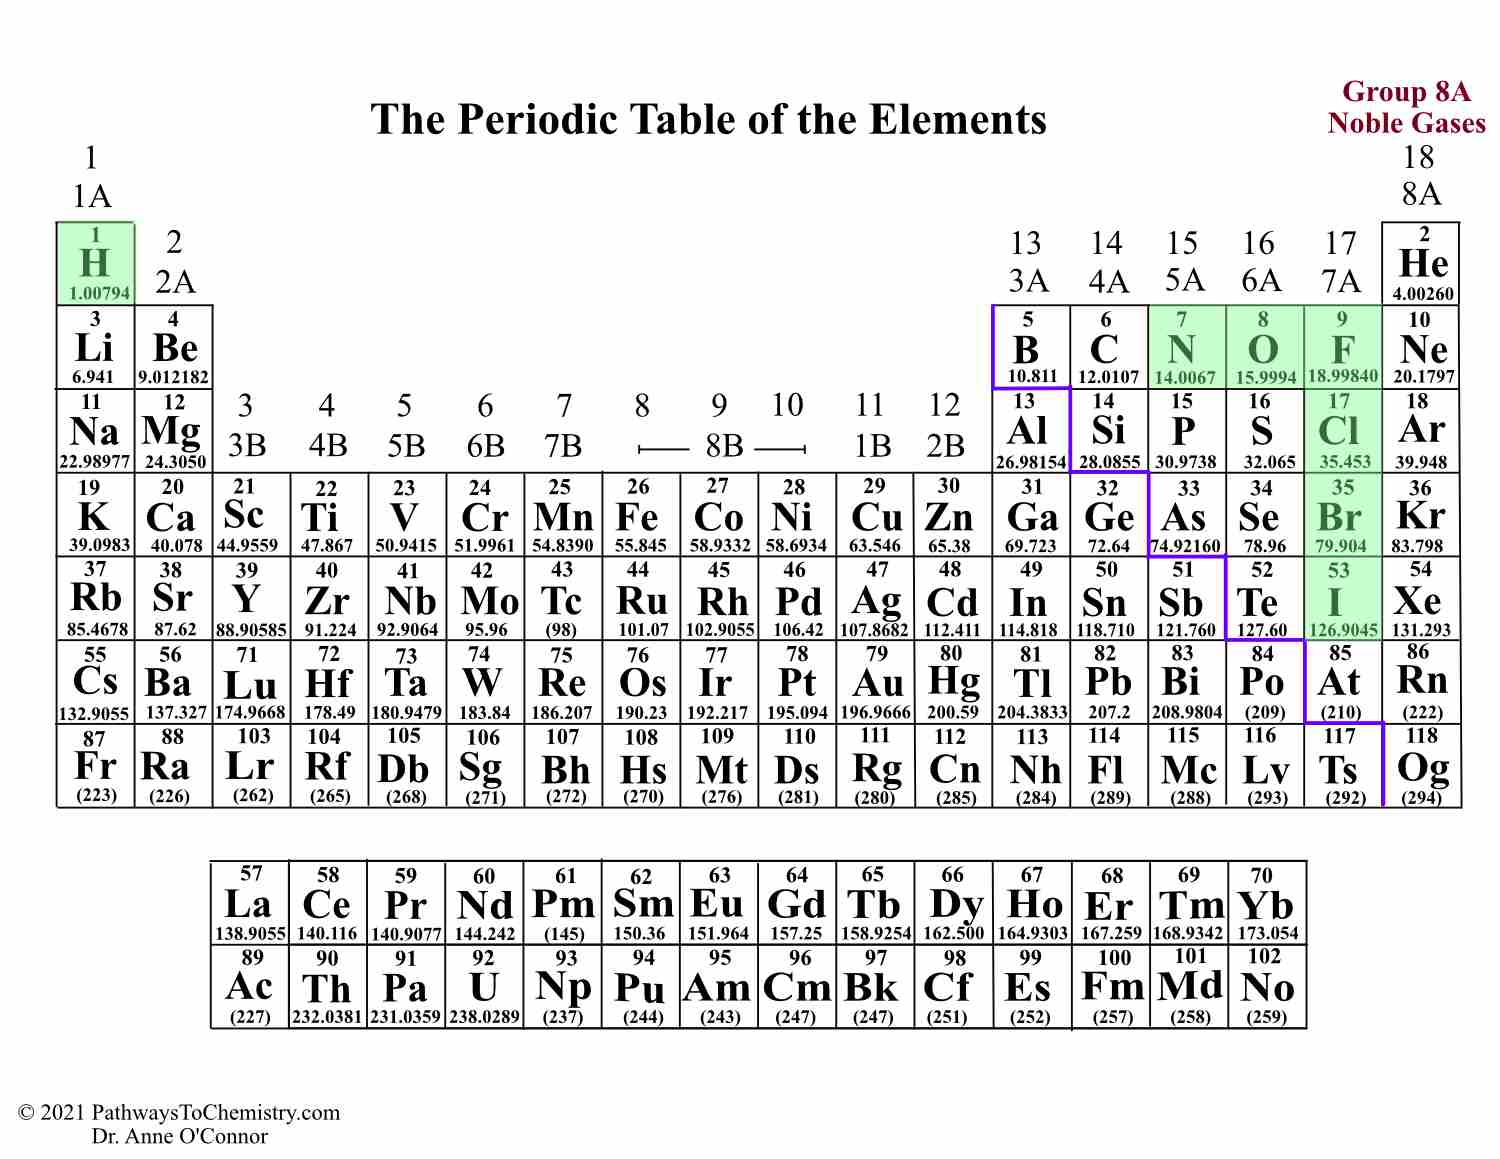 The Periodic Table and its Design | Pathways to Chemistry